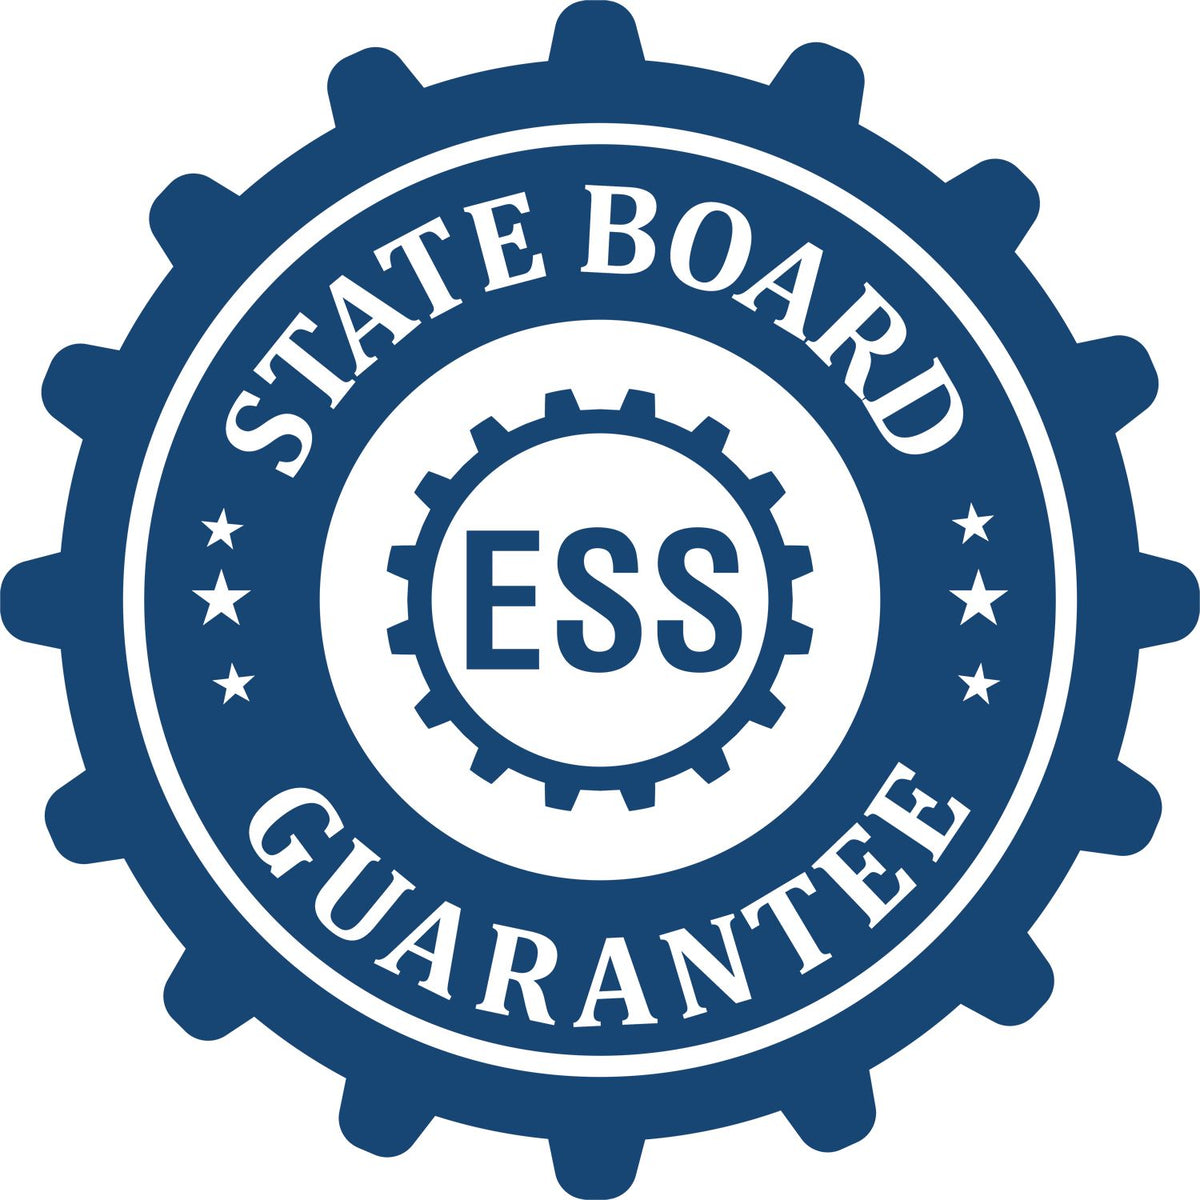 An emblem in a gear shape illustrating a state board guarantee for the Heavy Duty Cast Iron Florida Architect Embosser product.